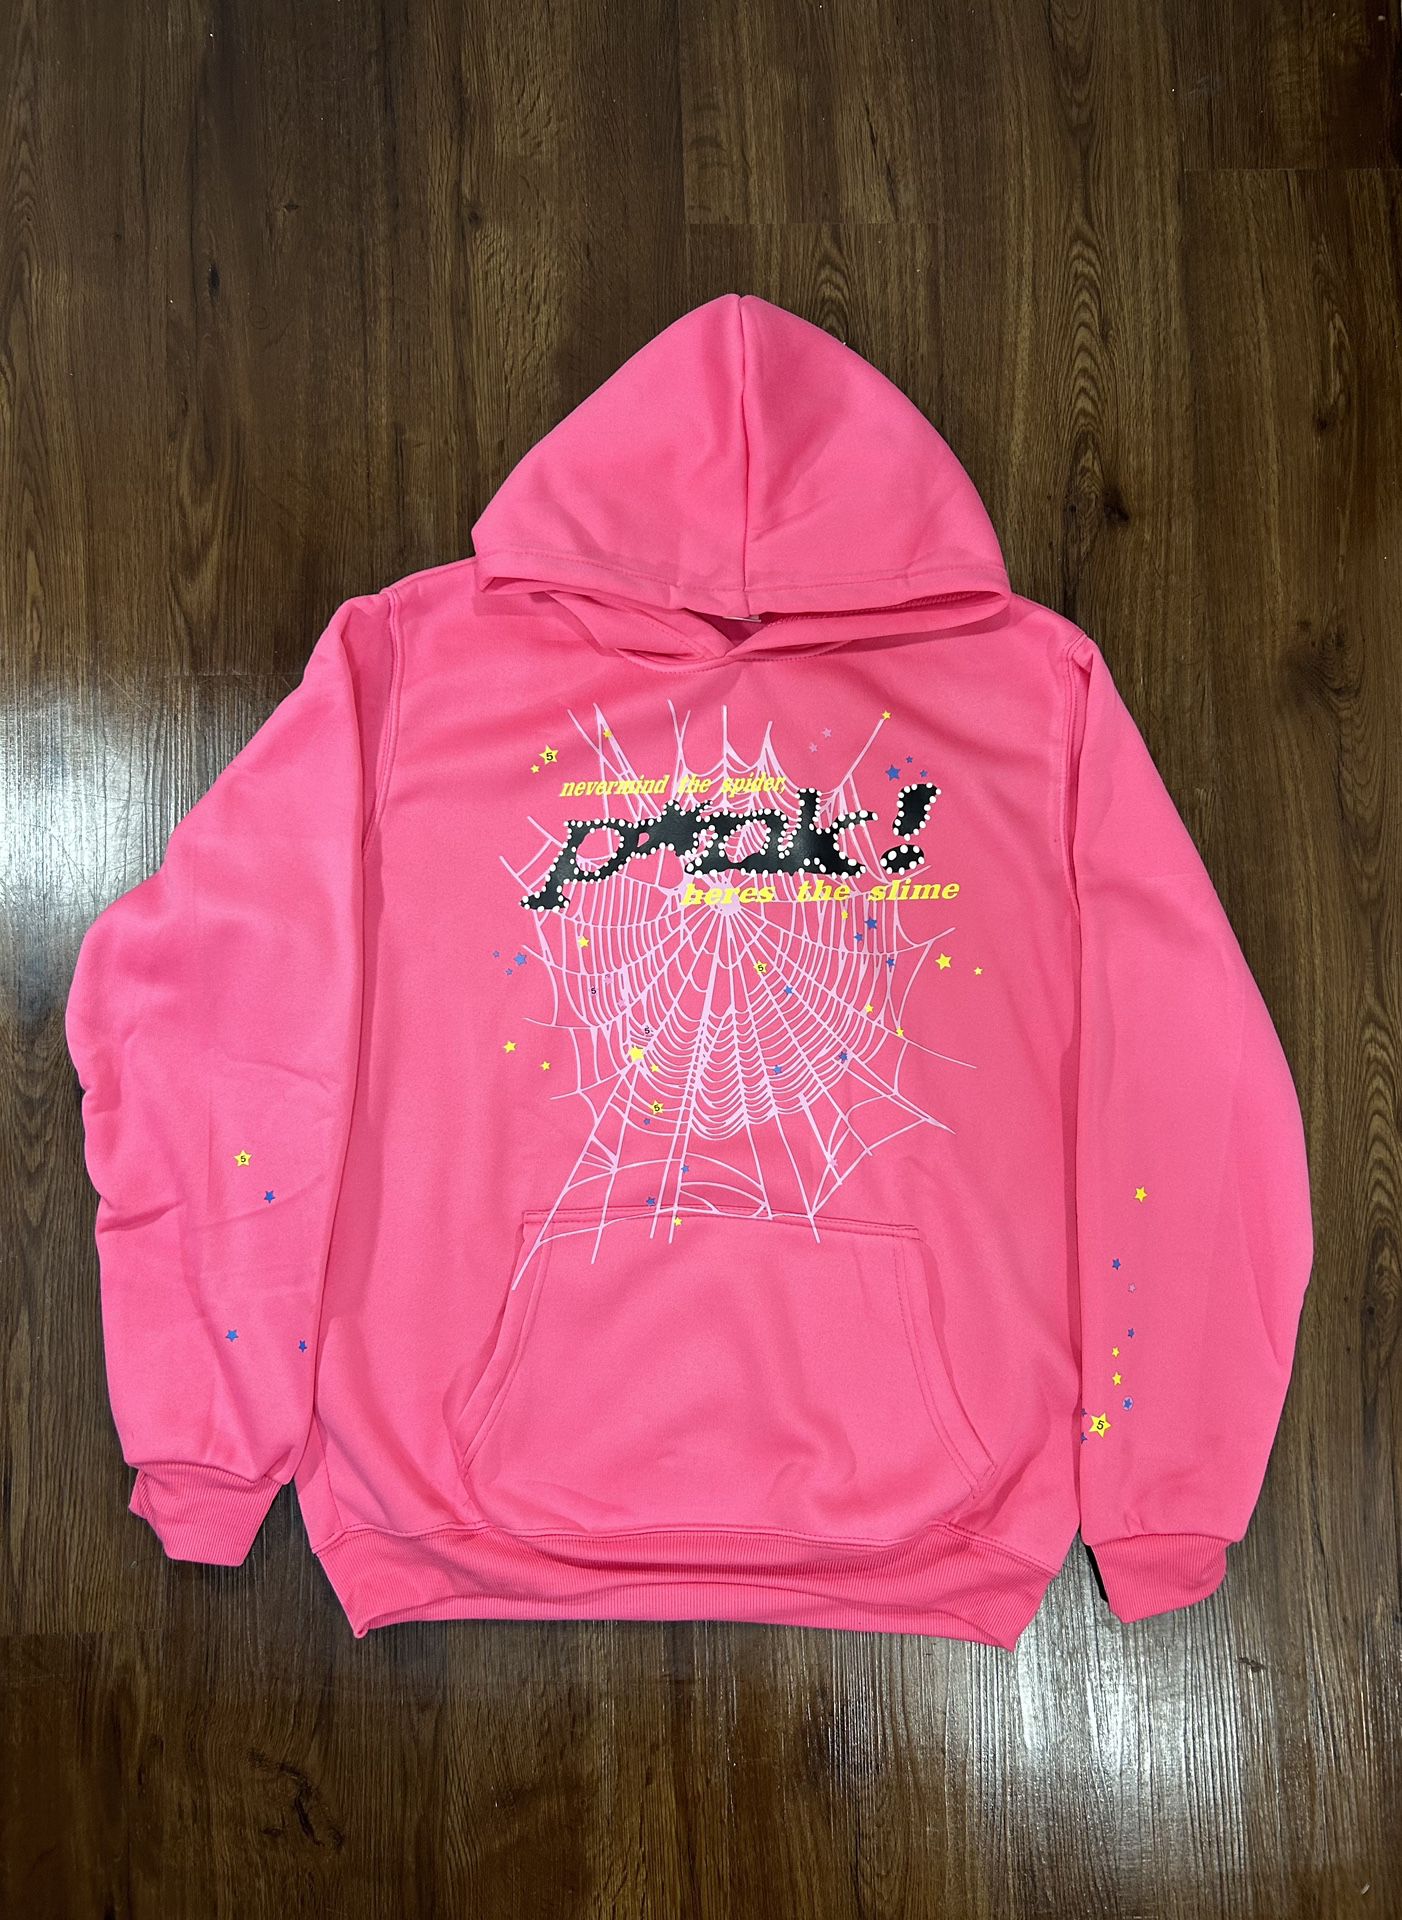 NEW Sp5der P*NK V2 PINK Hoodie Large ACCEPTING OFFERS 